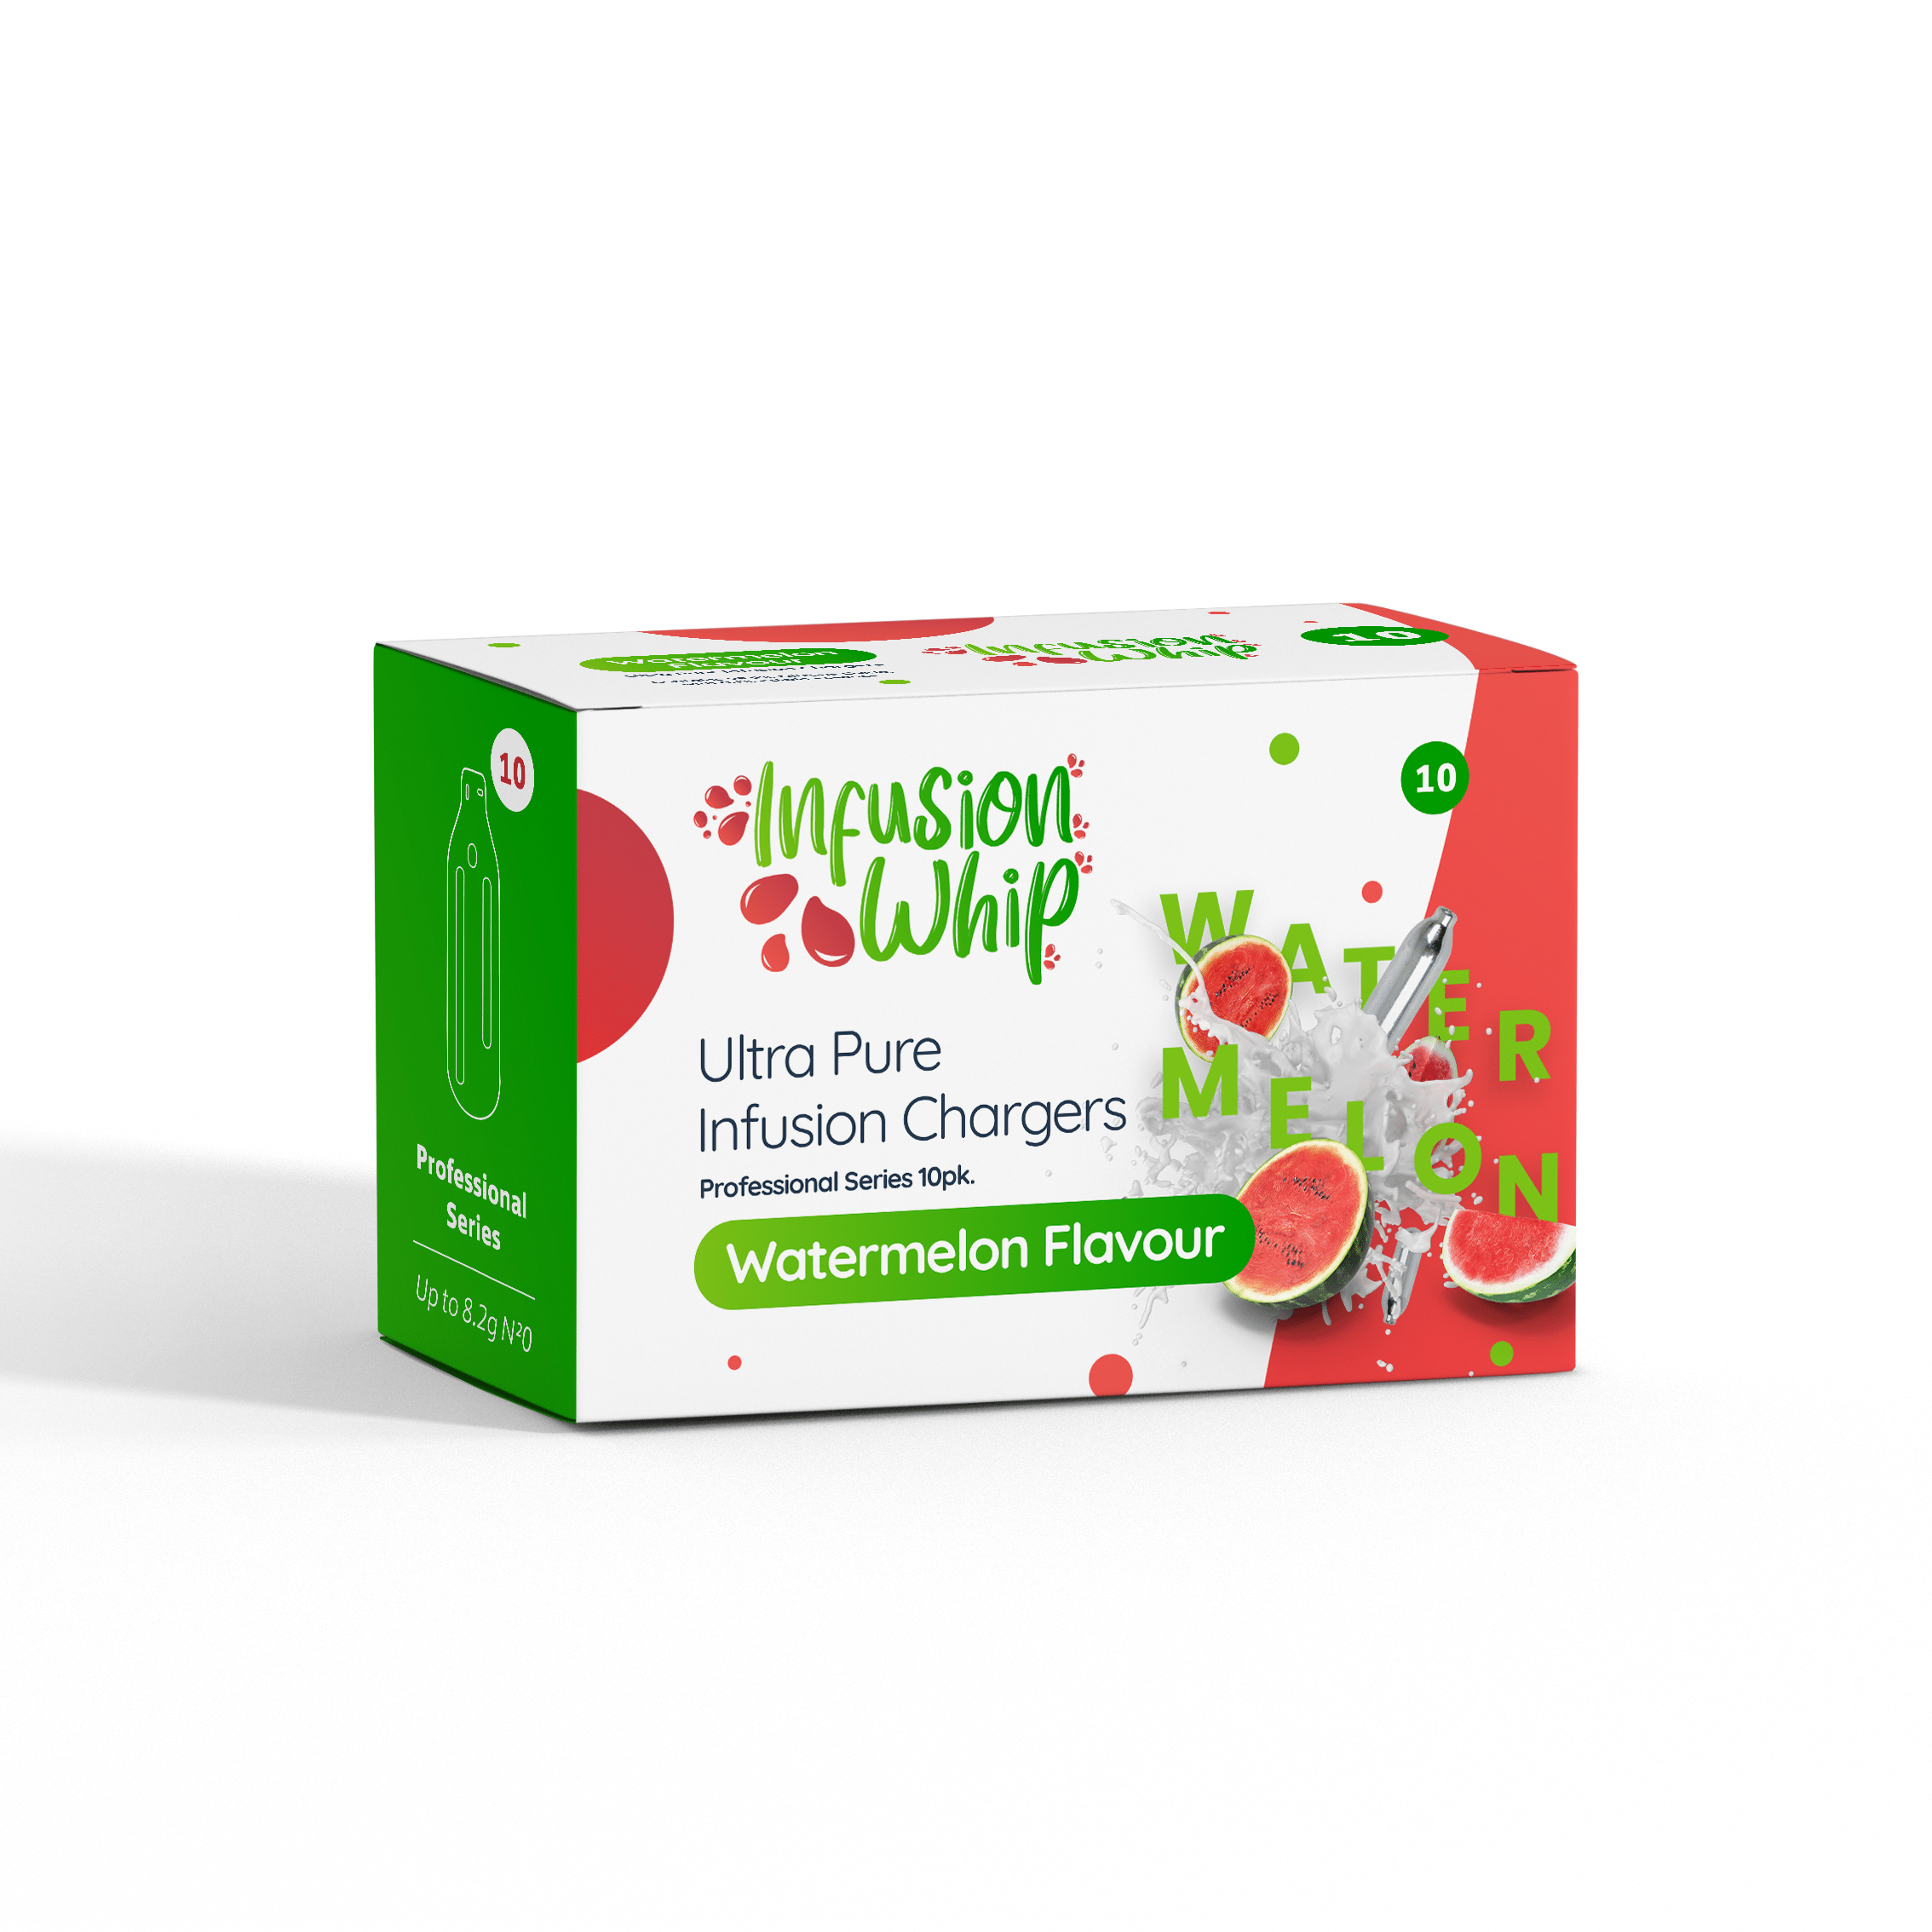 New Infusionwhip Watermelon Infusion Chargers 8.2g - 10pks